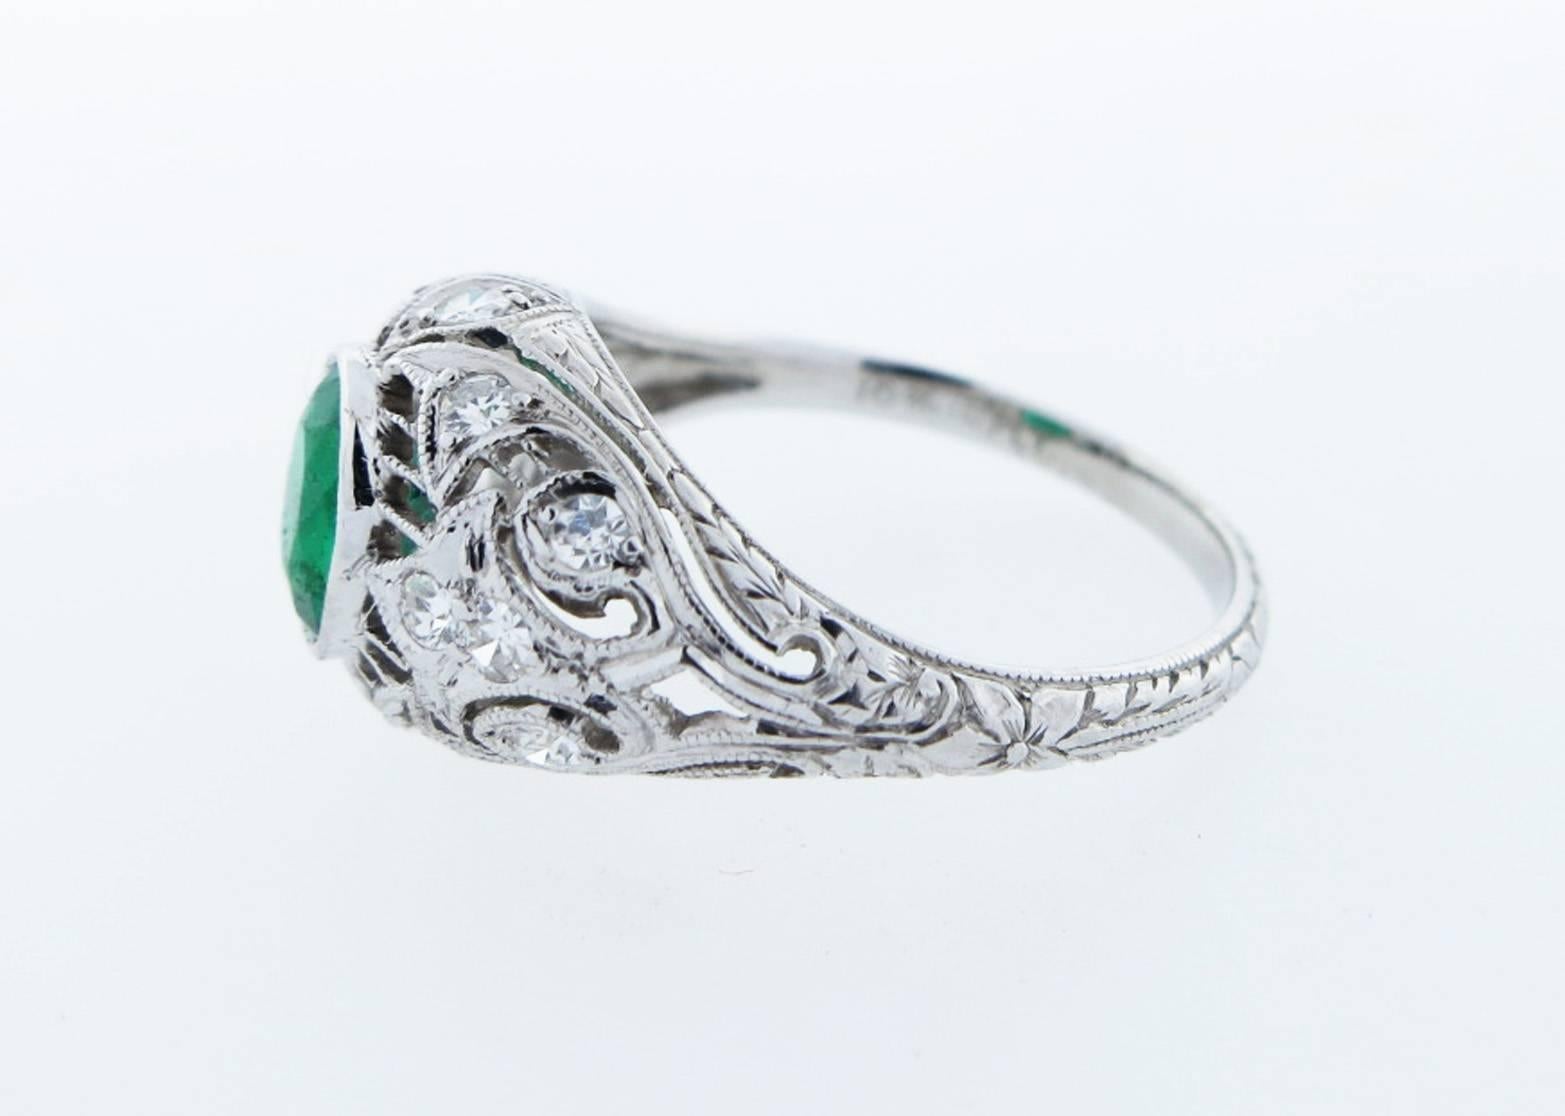 Unique open work platinum ring circa 1920. Bezel set with a center oval faceted natural emerald measuring 6.3 mm. x 5.2 mm. weighing approx .70cts. Bead set in an exquisitely engraved mount with 14 round diamond accents totaling approx .20cts.  size